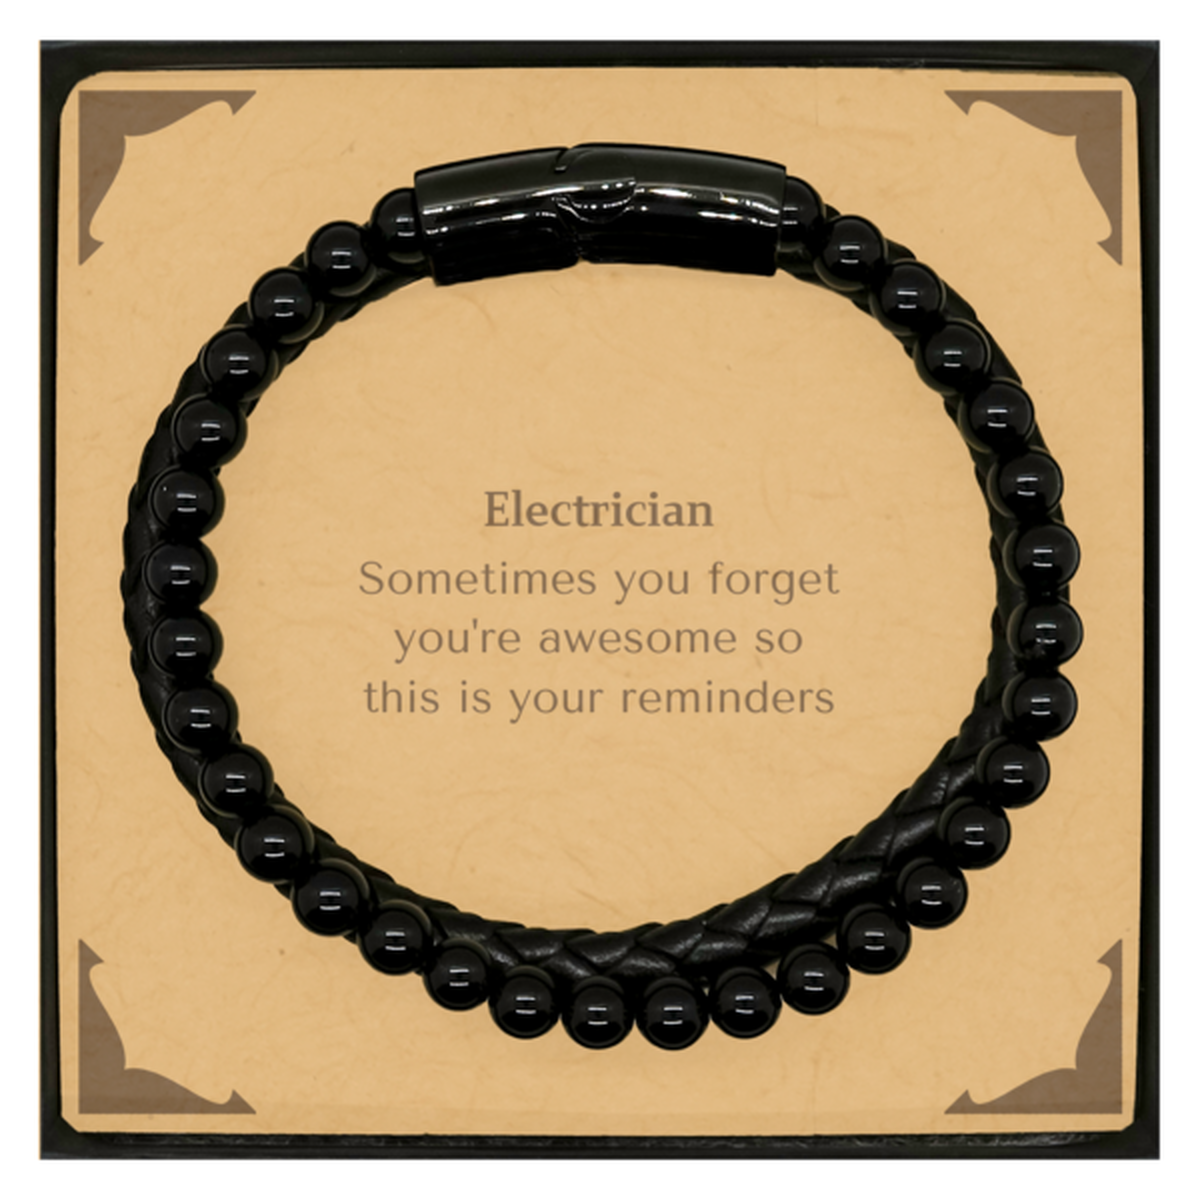 Sentimental Electrician Stone Leather Bracelets, Electrician Sometimes you forget you're awesome so this is your reminders, Graduation Christmas Birthday Gifts for Electrician, Men, Women, Coworkers